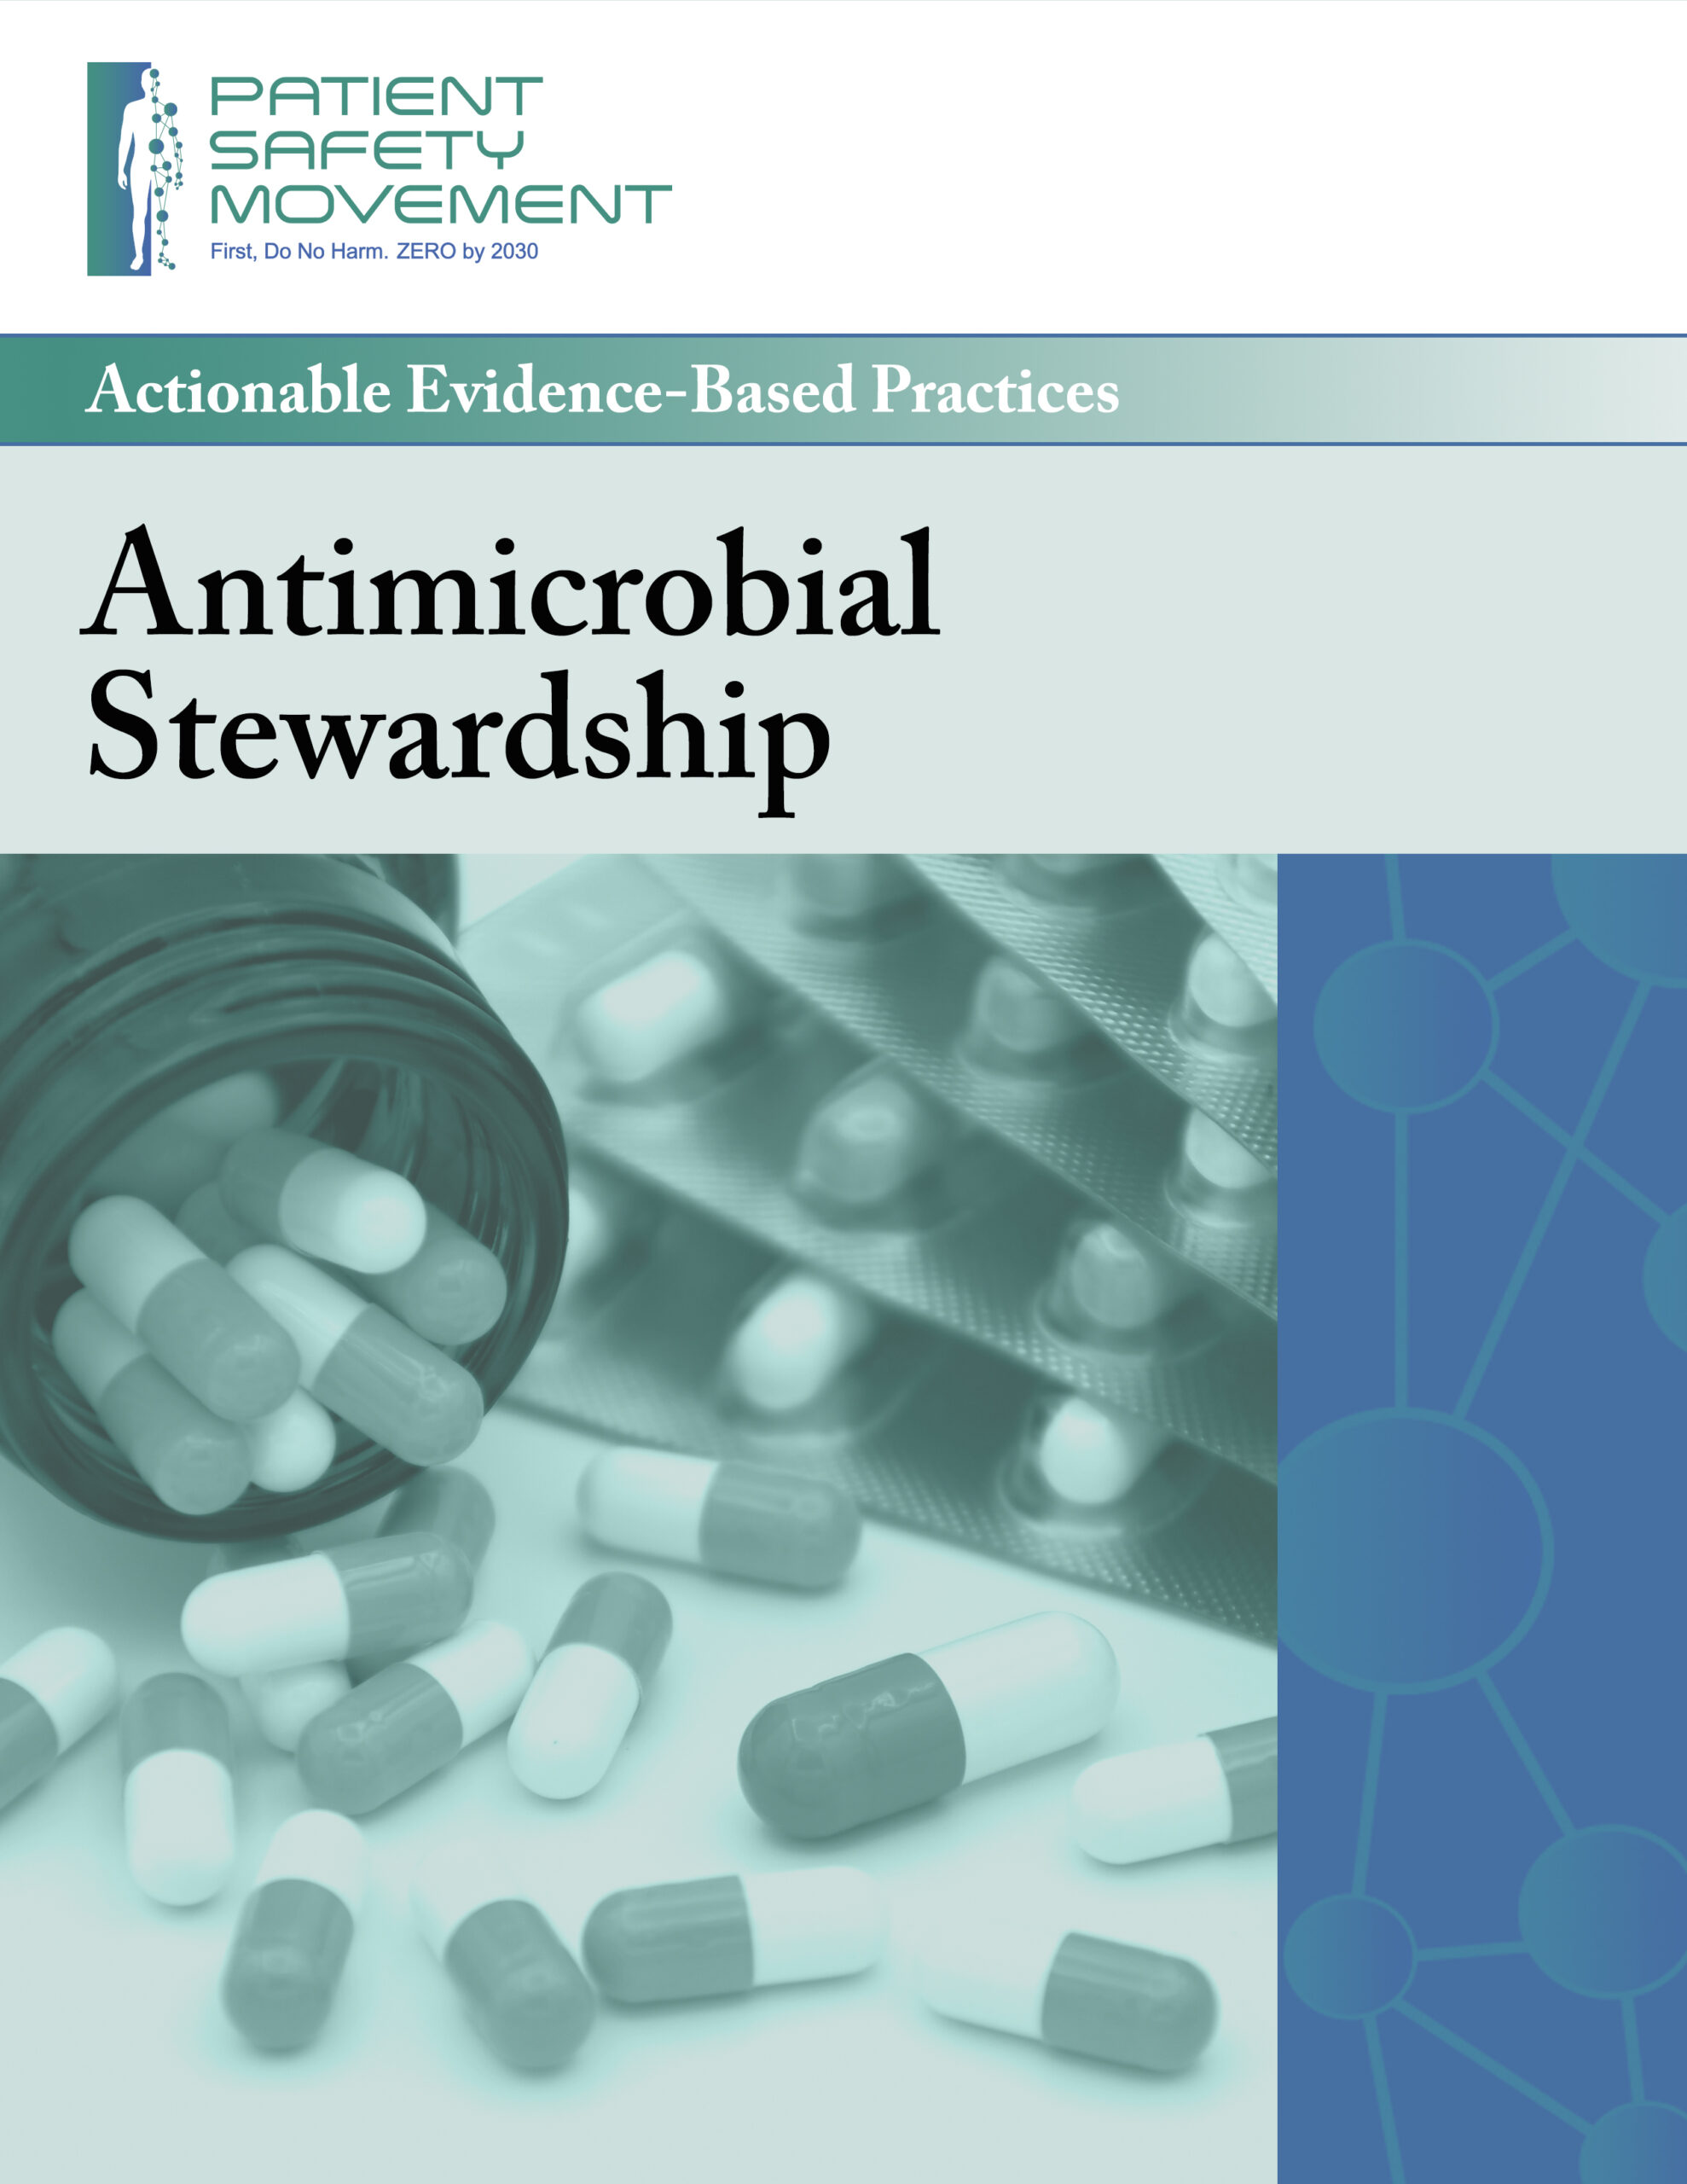 antimicrobial stewardship cover 2d scaled